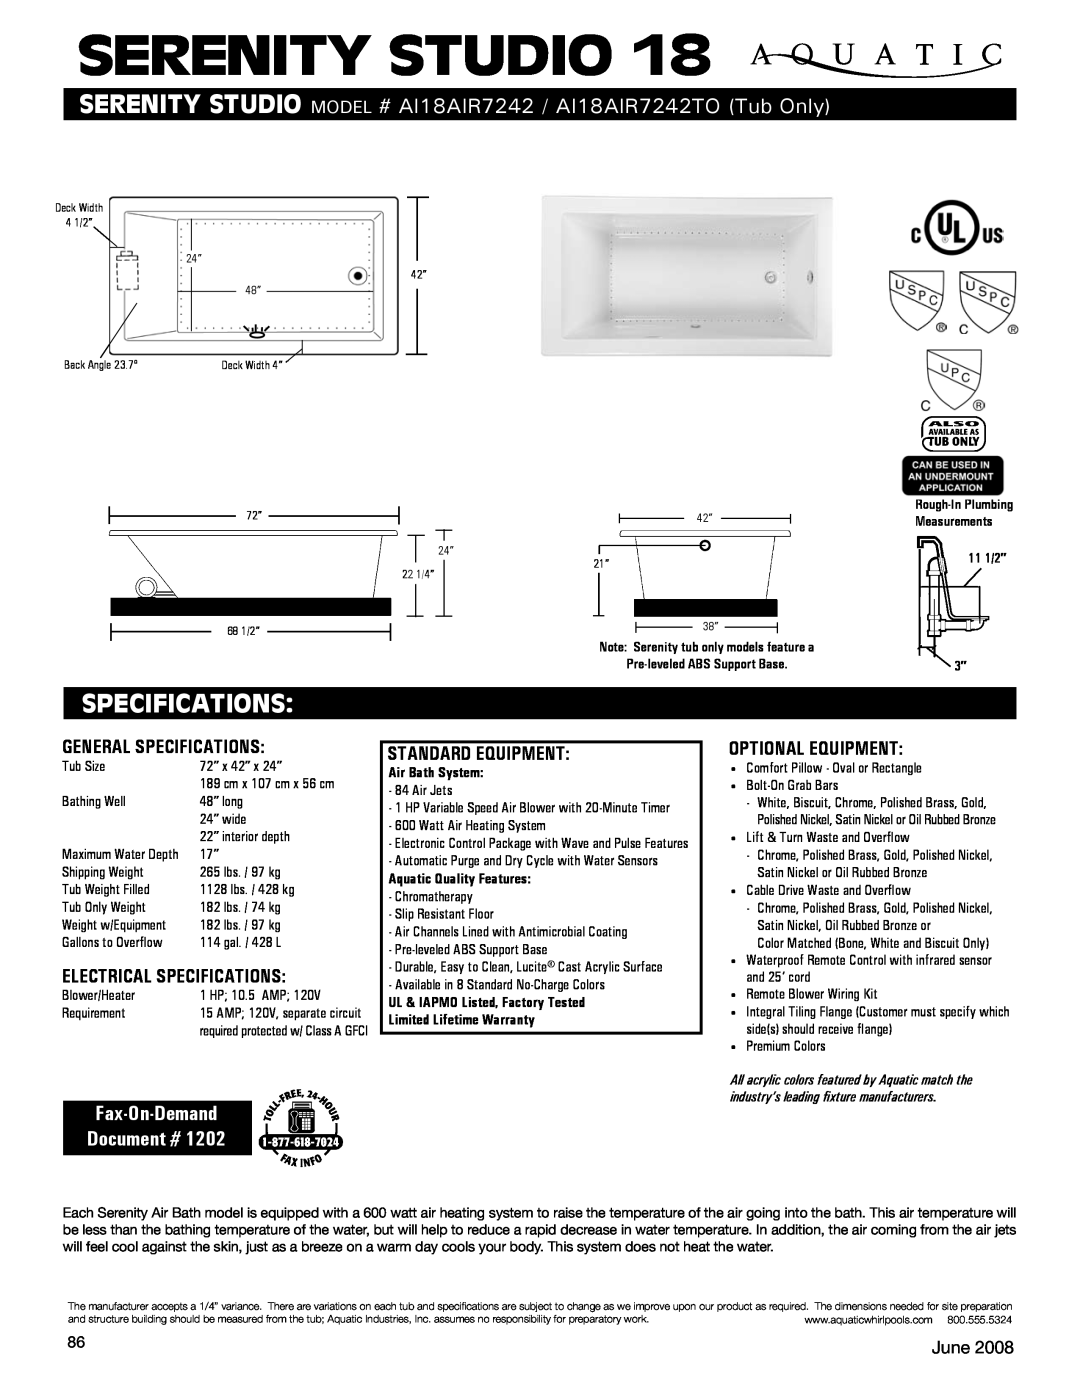 Aquatic AI18AIR7242TO specifications Serenity studio, Fax-On-Demand Document #, General Specifications, June 